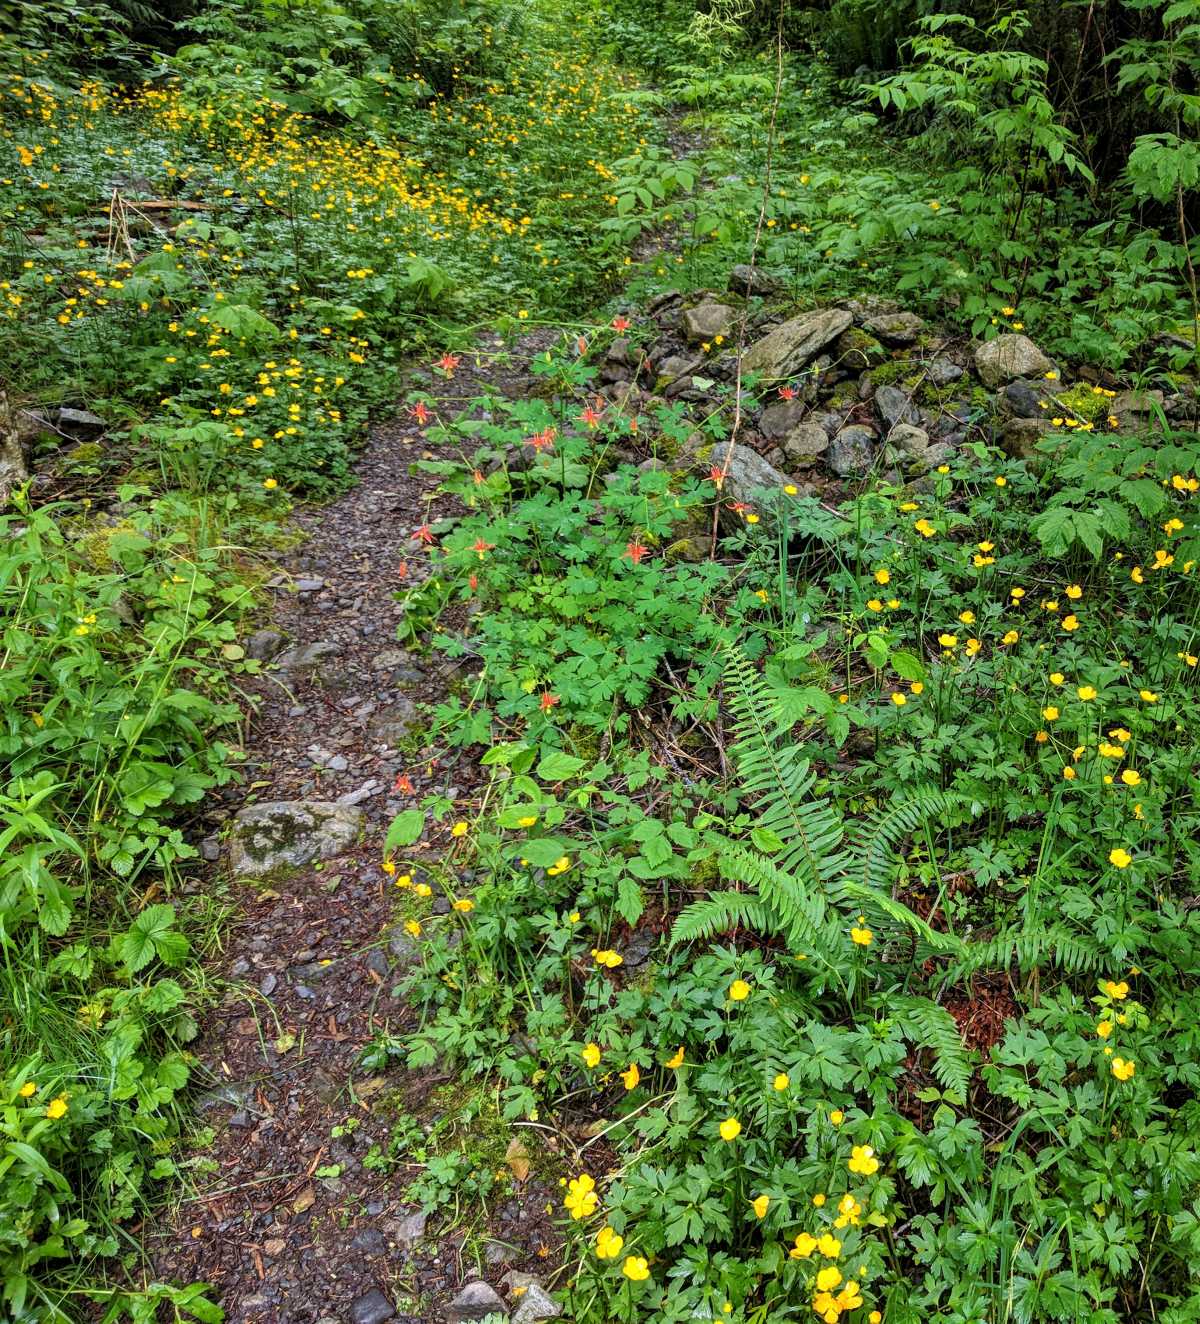 Wildflowers on the trail